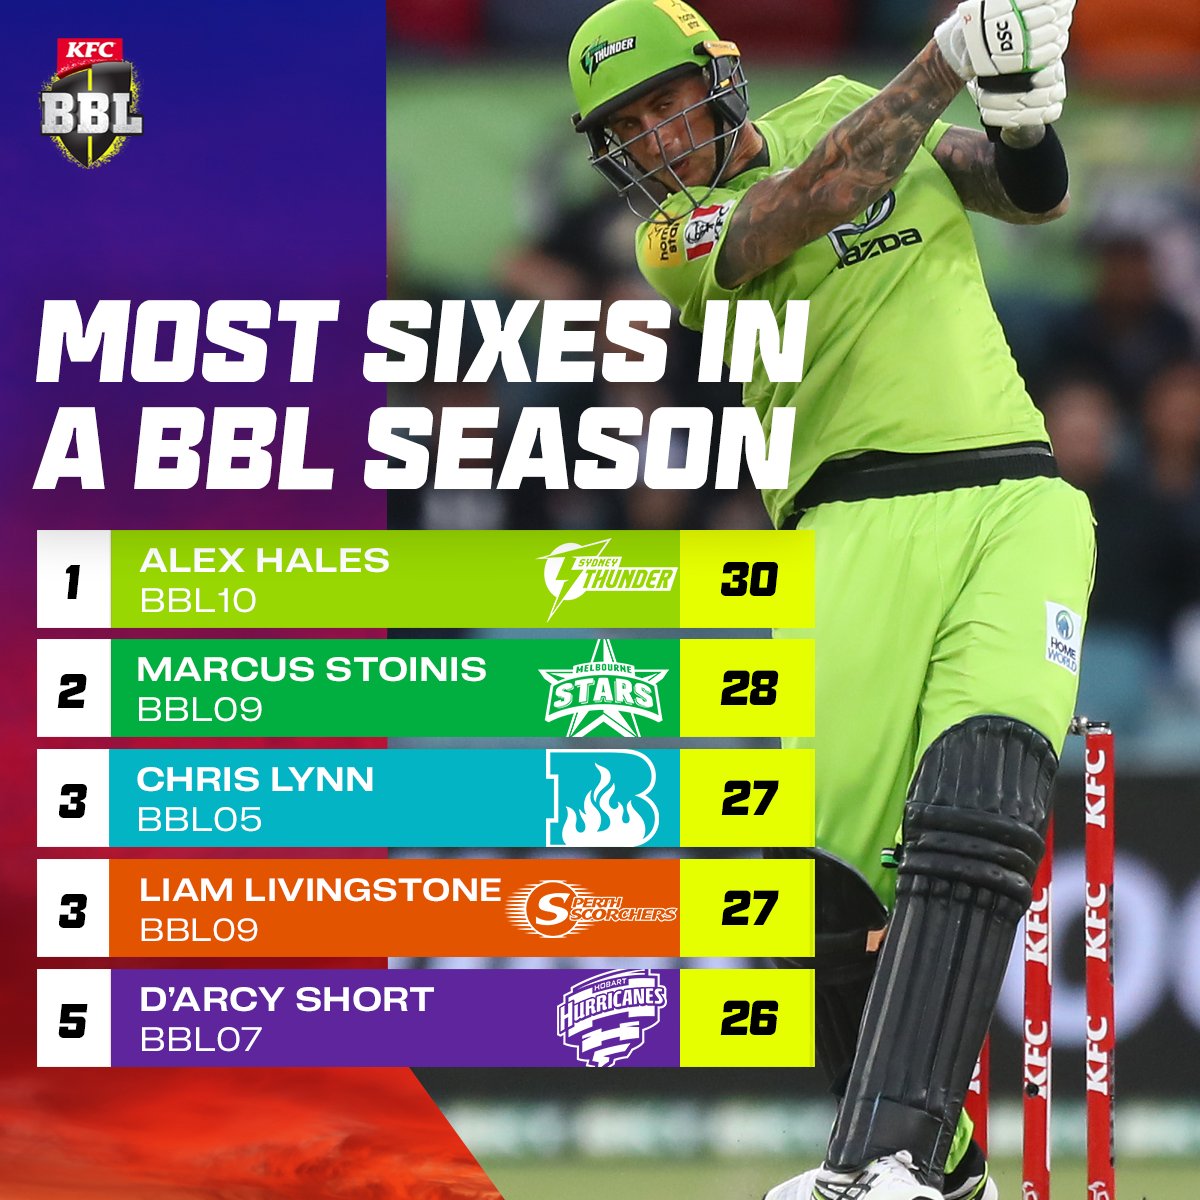 A historic BBL10 campaign.

Can Alex Hales maintain the pace in #BBL11?